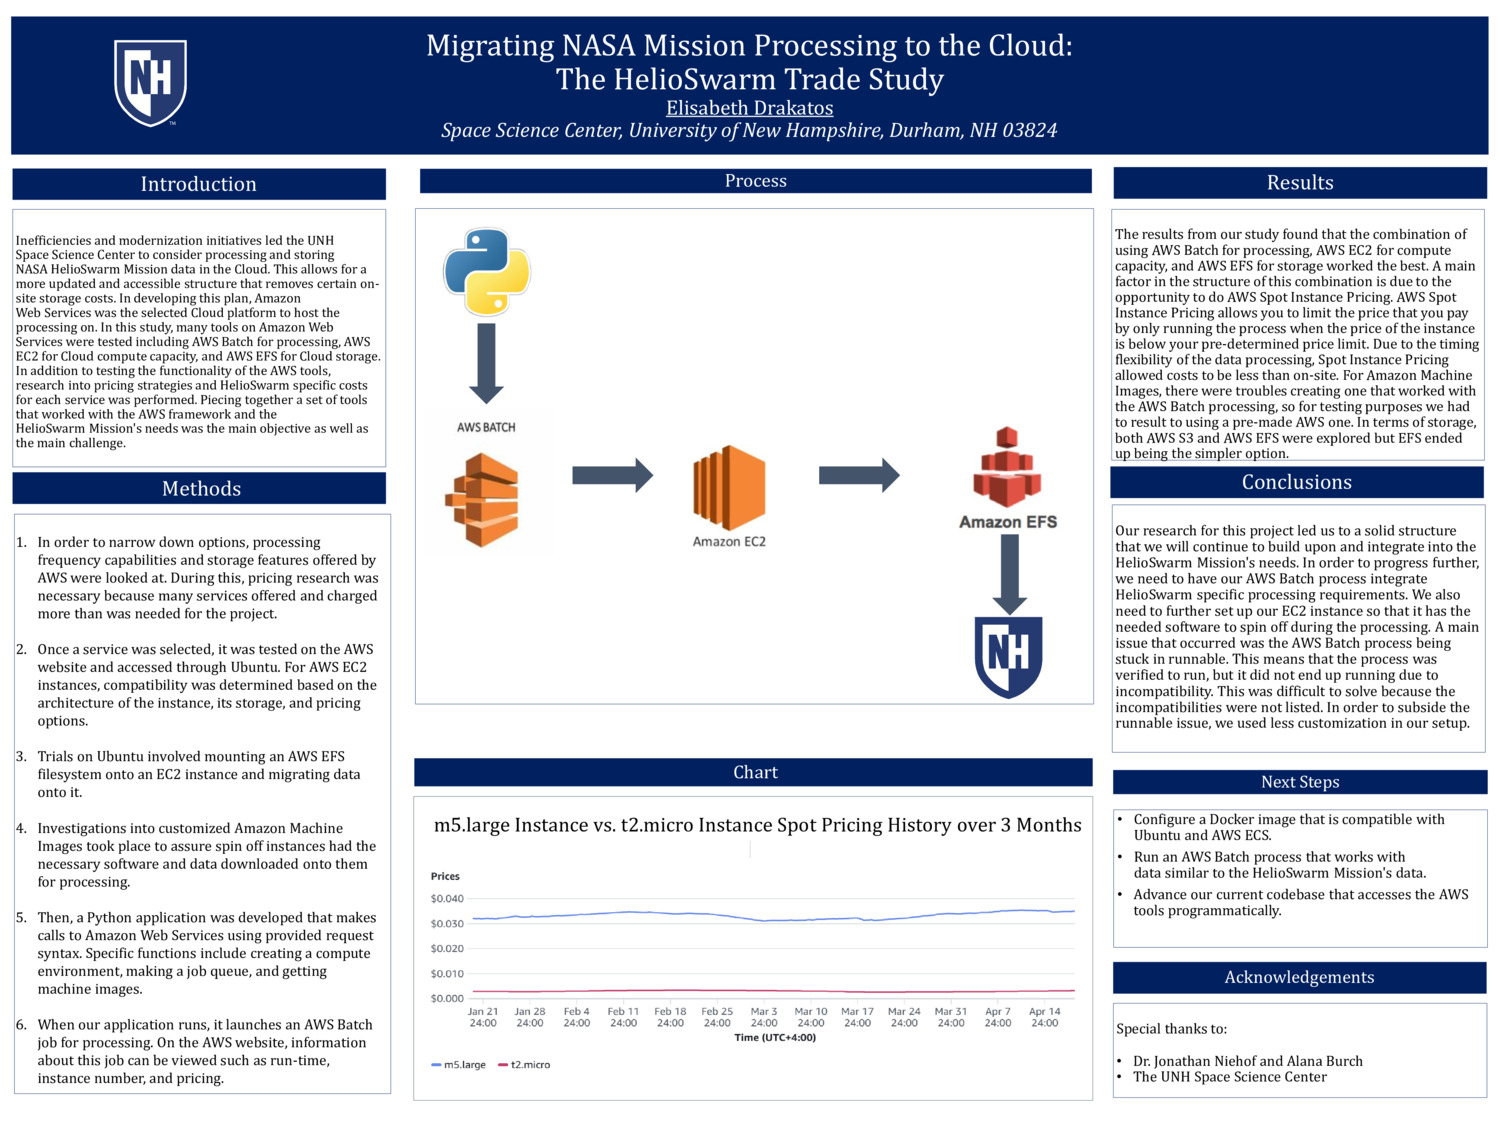 Migrating Nasa Data Processing To The Cloud: The Helioswarm Trade Study by edrakatos